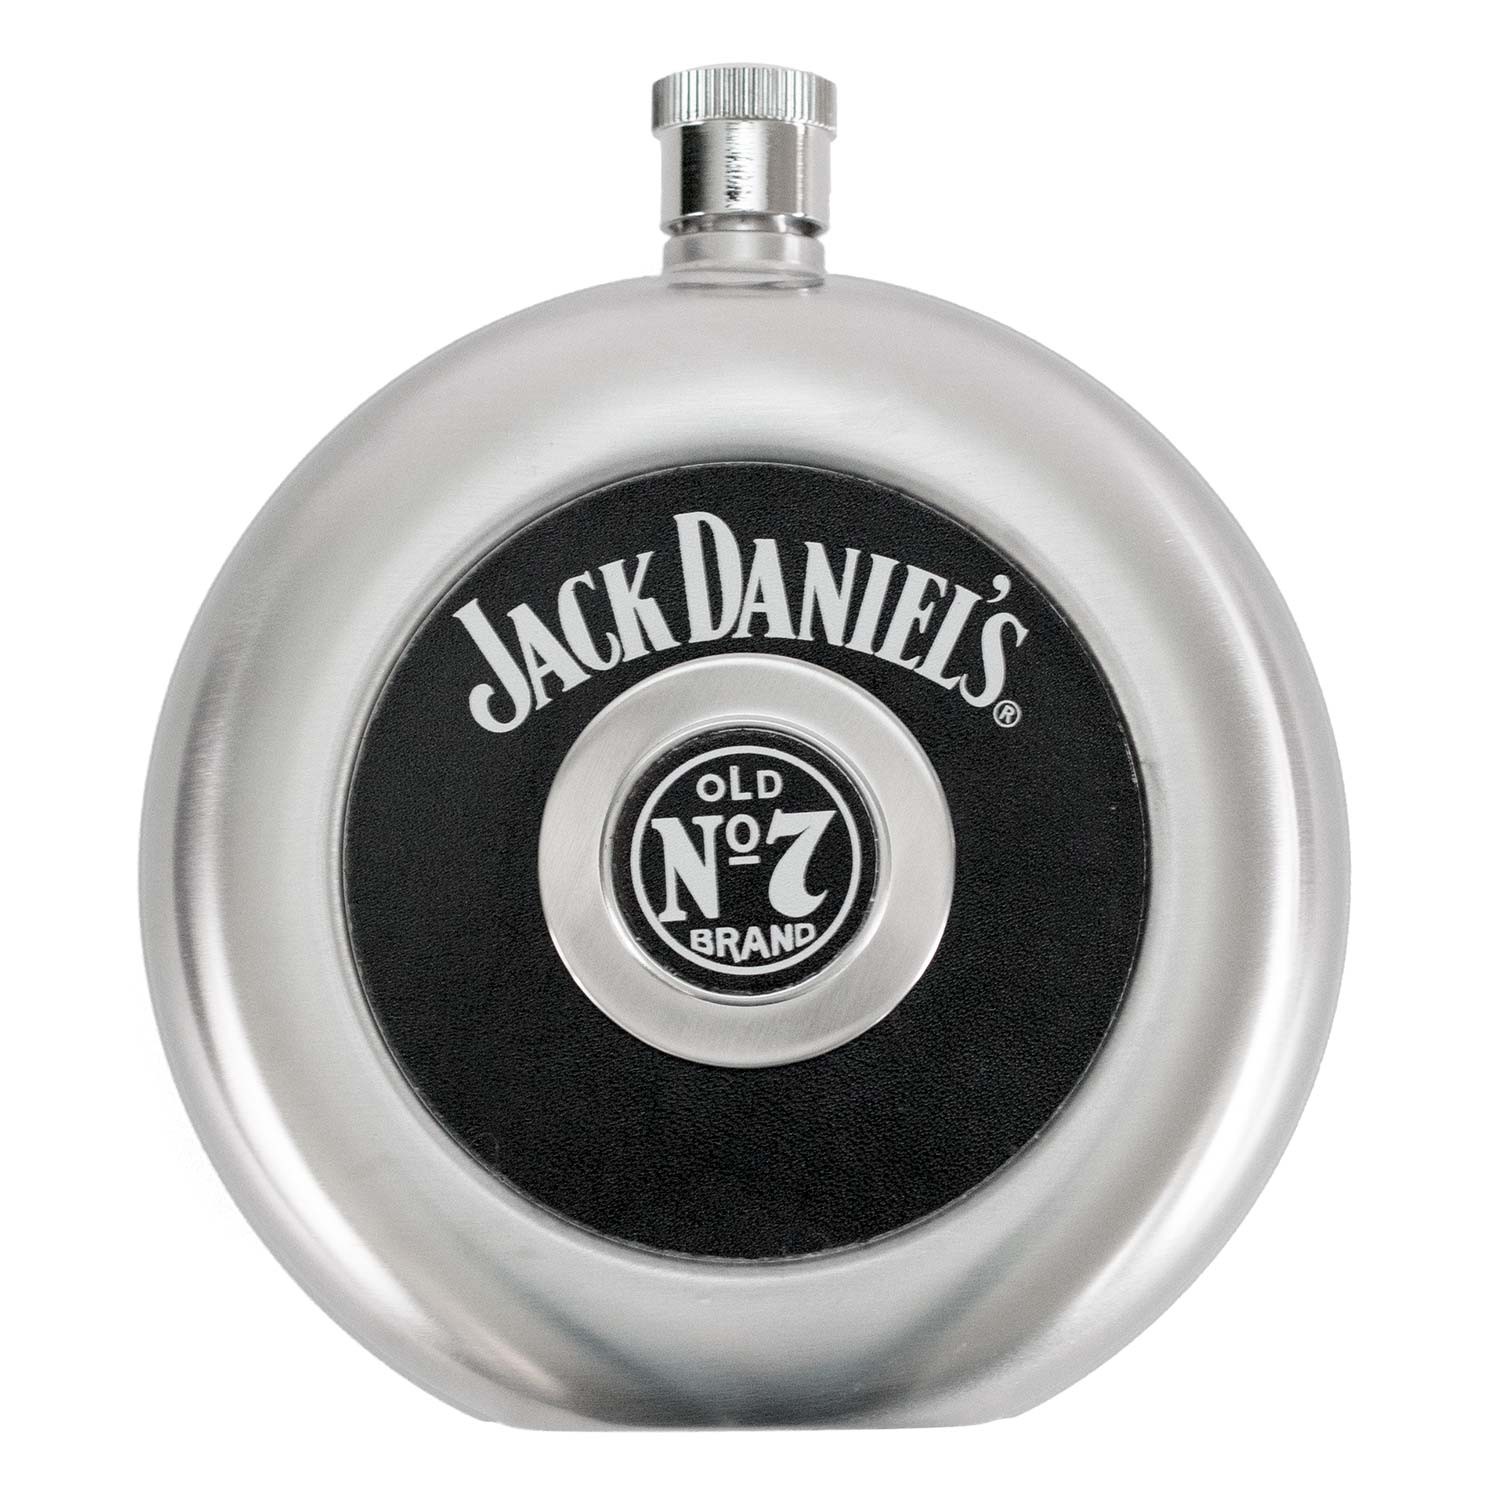 Jack Daniels Flask With Removable Shot